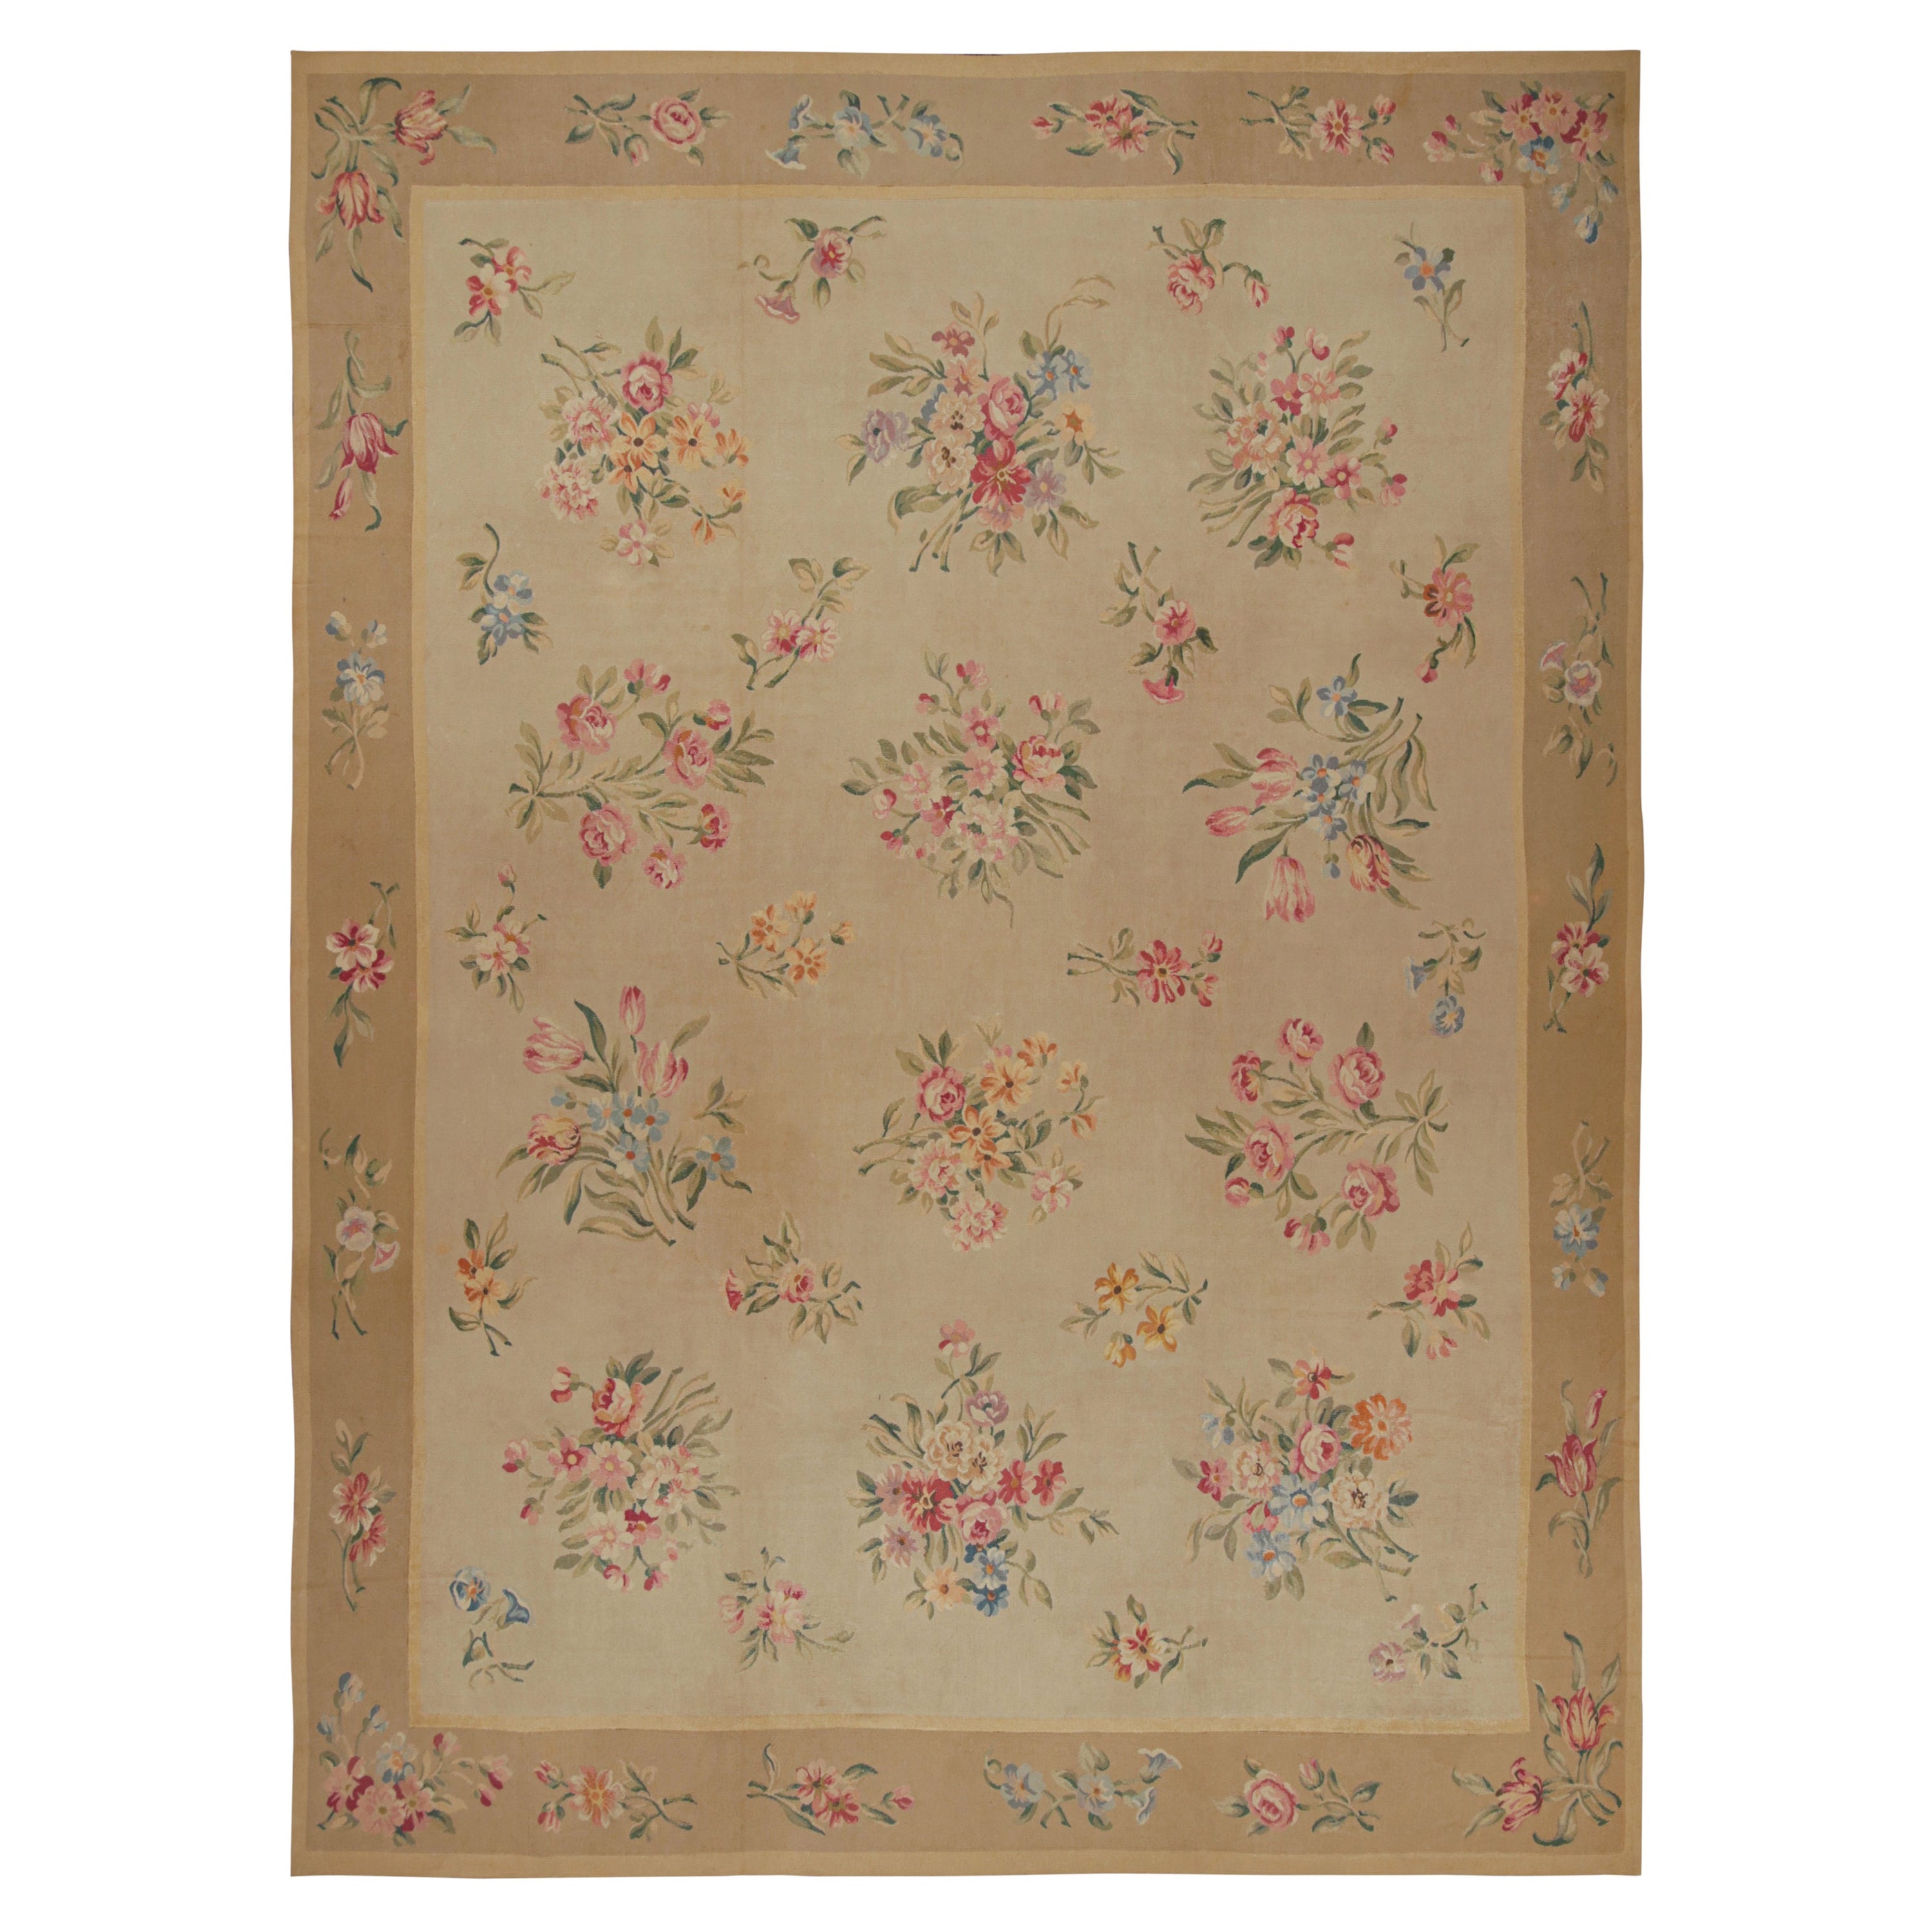 Antique Aubusson Rug in Beige-Brown with Floral Patterns, from Rug & Kilim For Sale